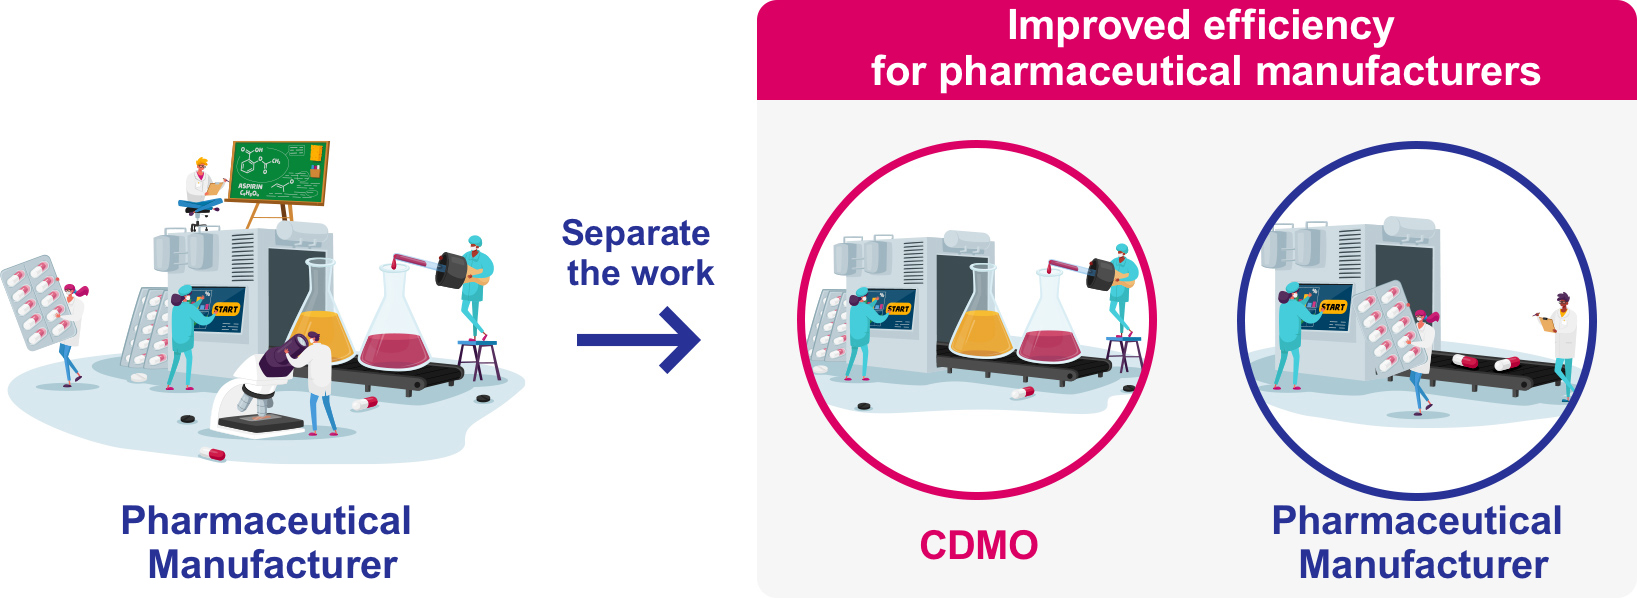 Improved efficiency for pharmaceutical manufacturers